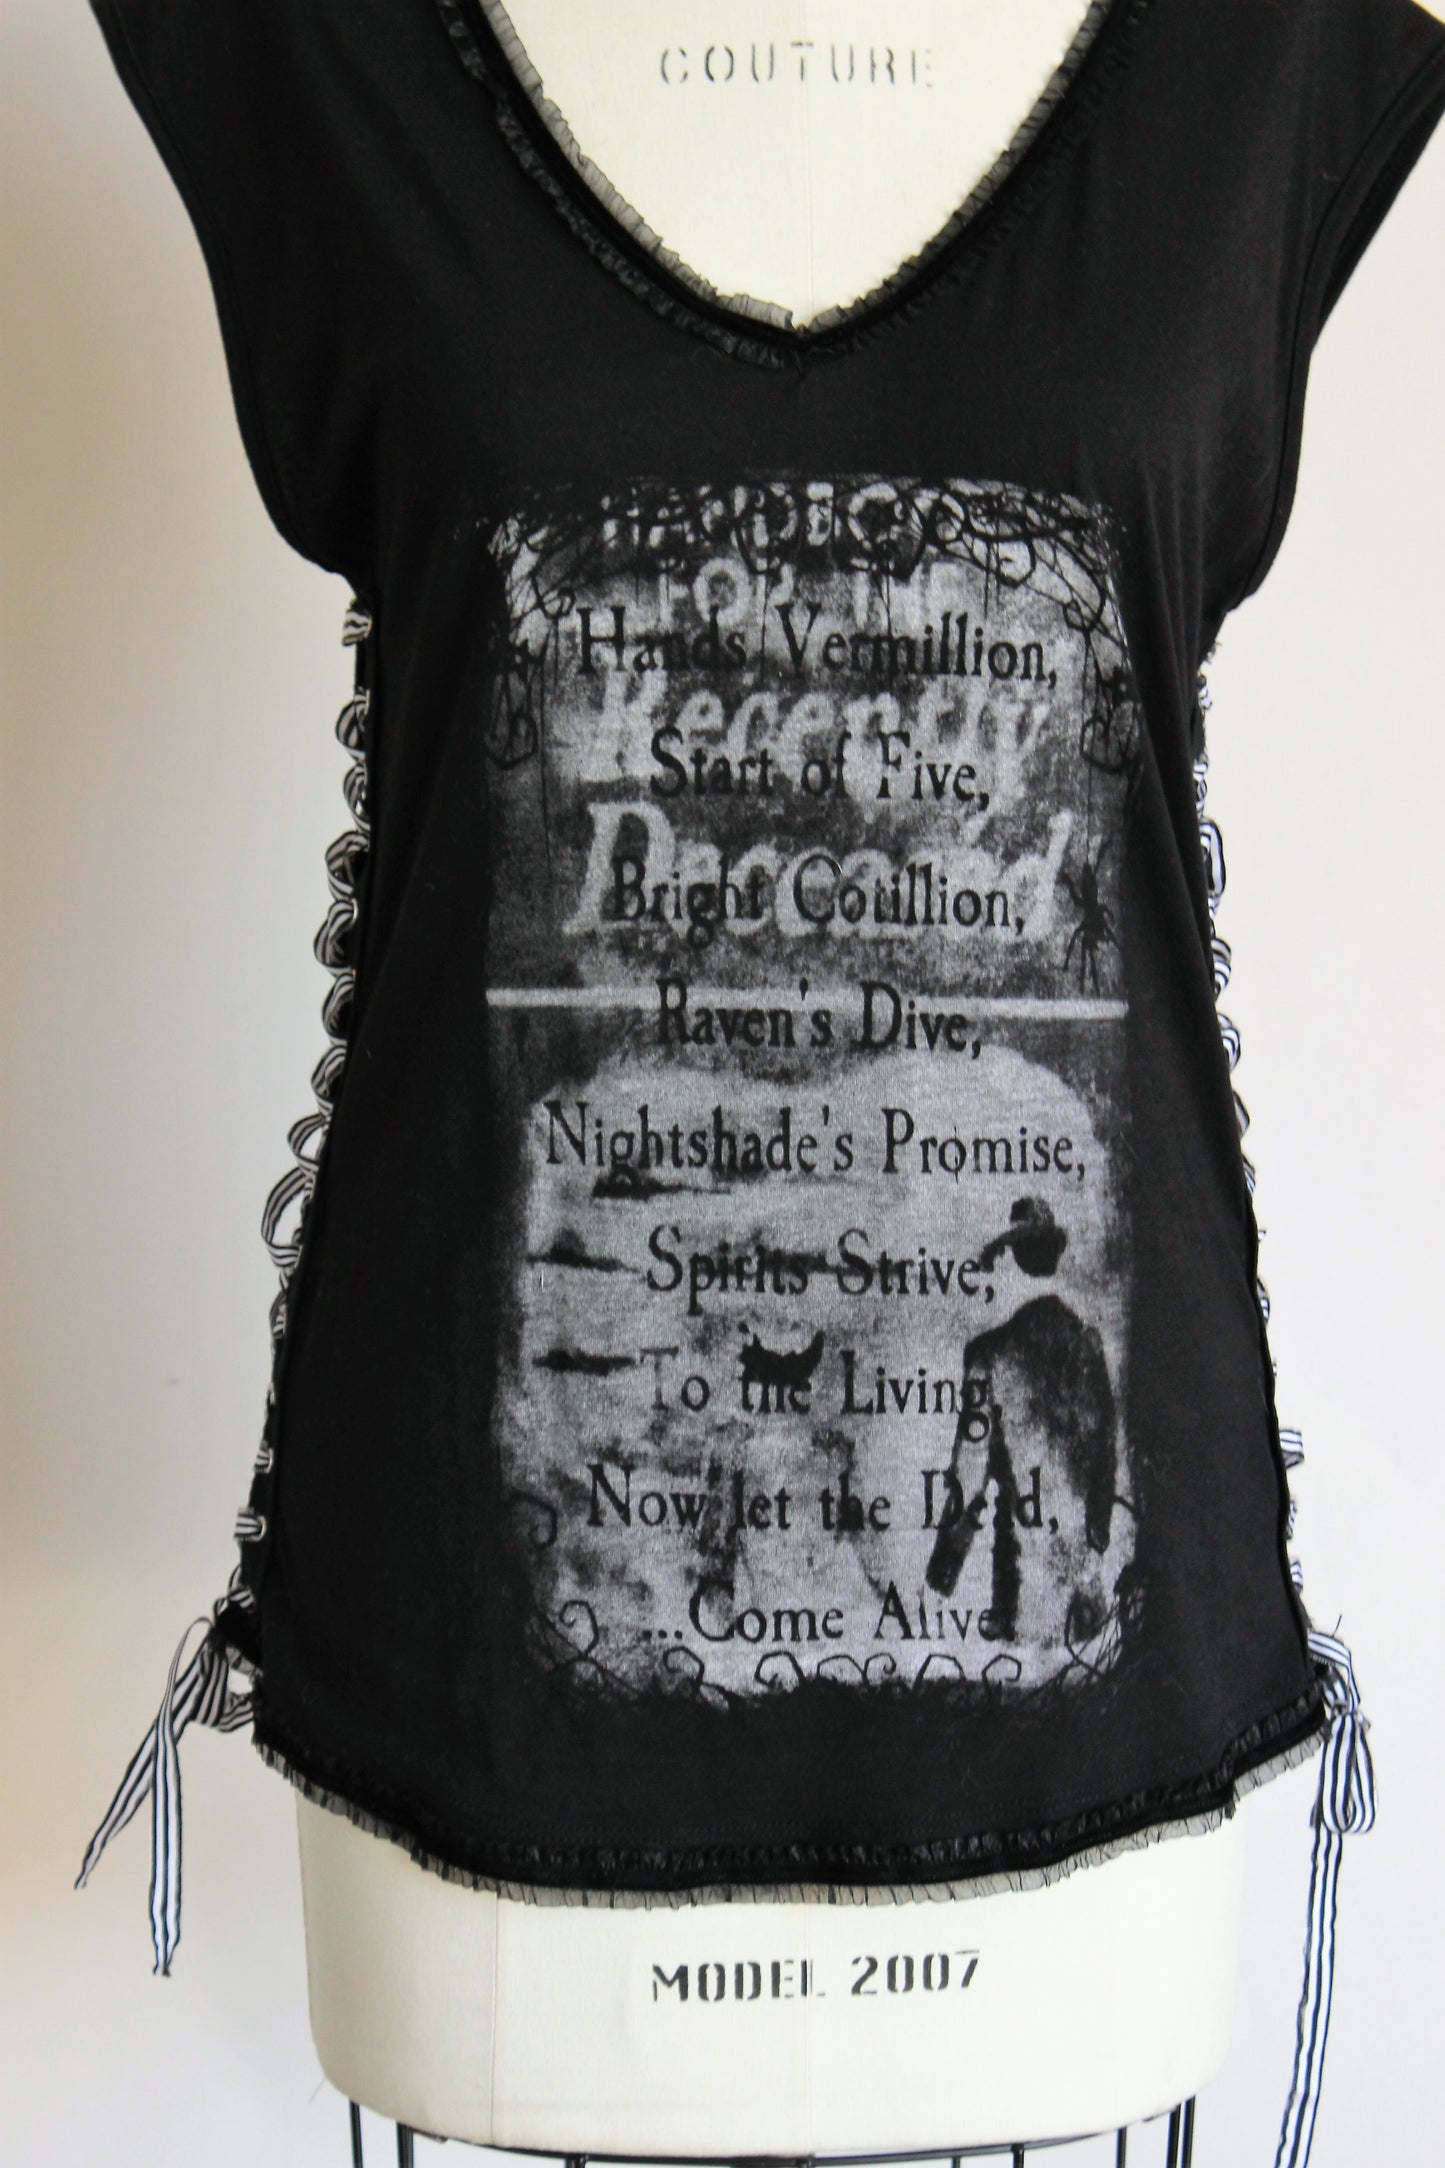 Malefic Apparel Custom Embellished T, "For the Recently Deceased", Size M